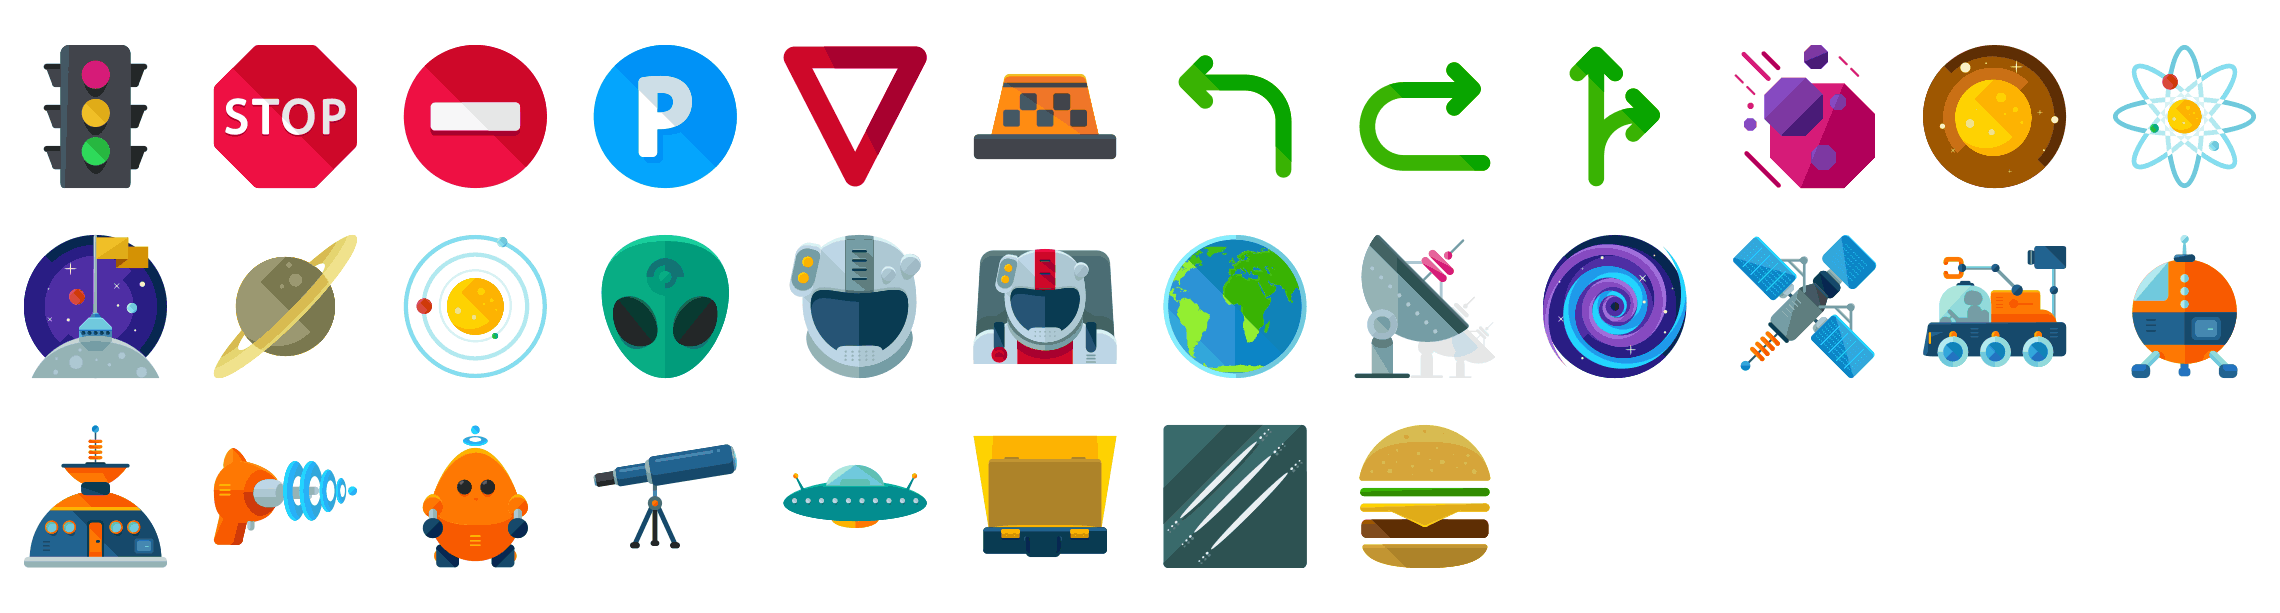 Miscellaneous-flat-icons